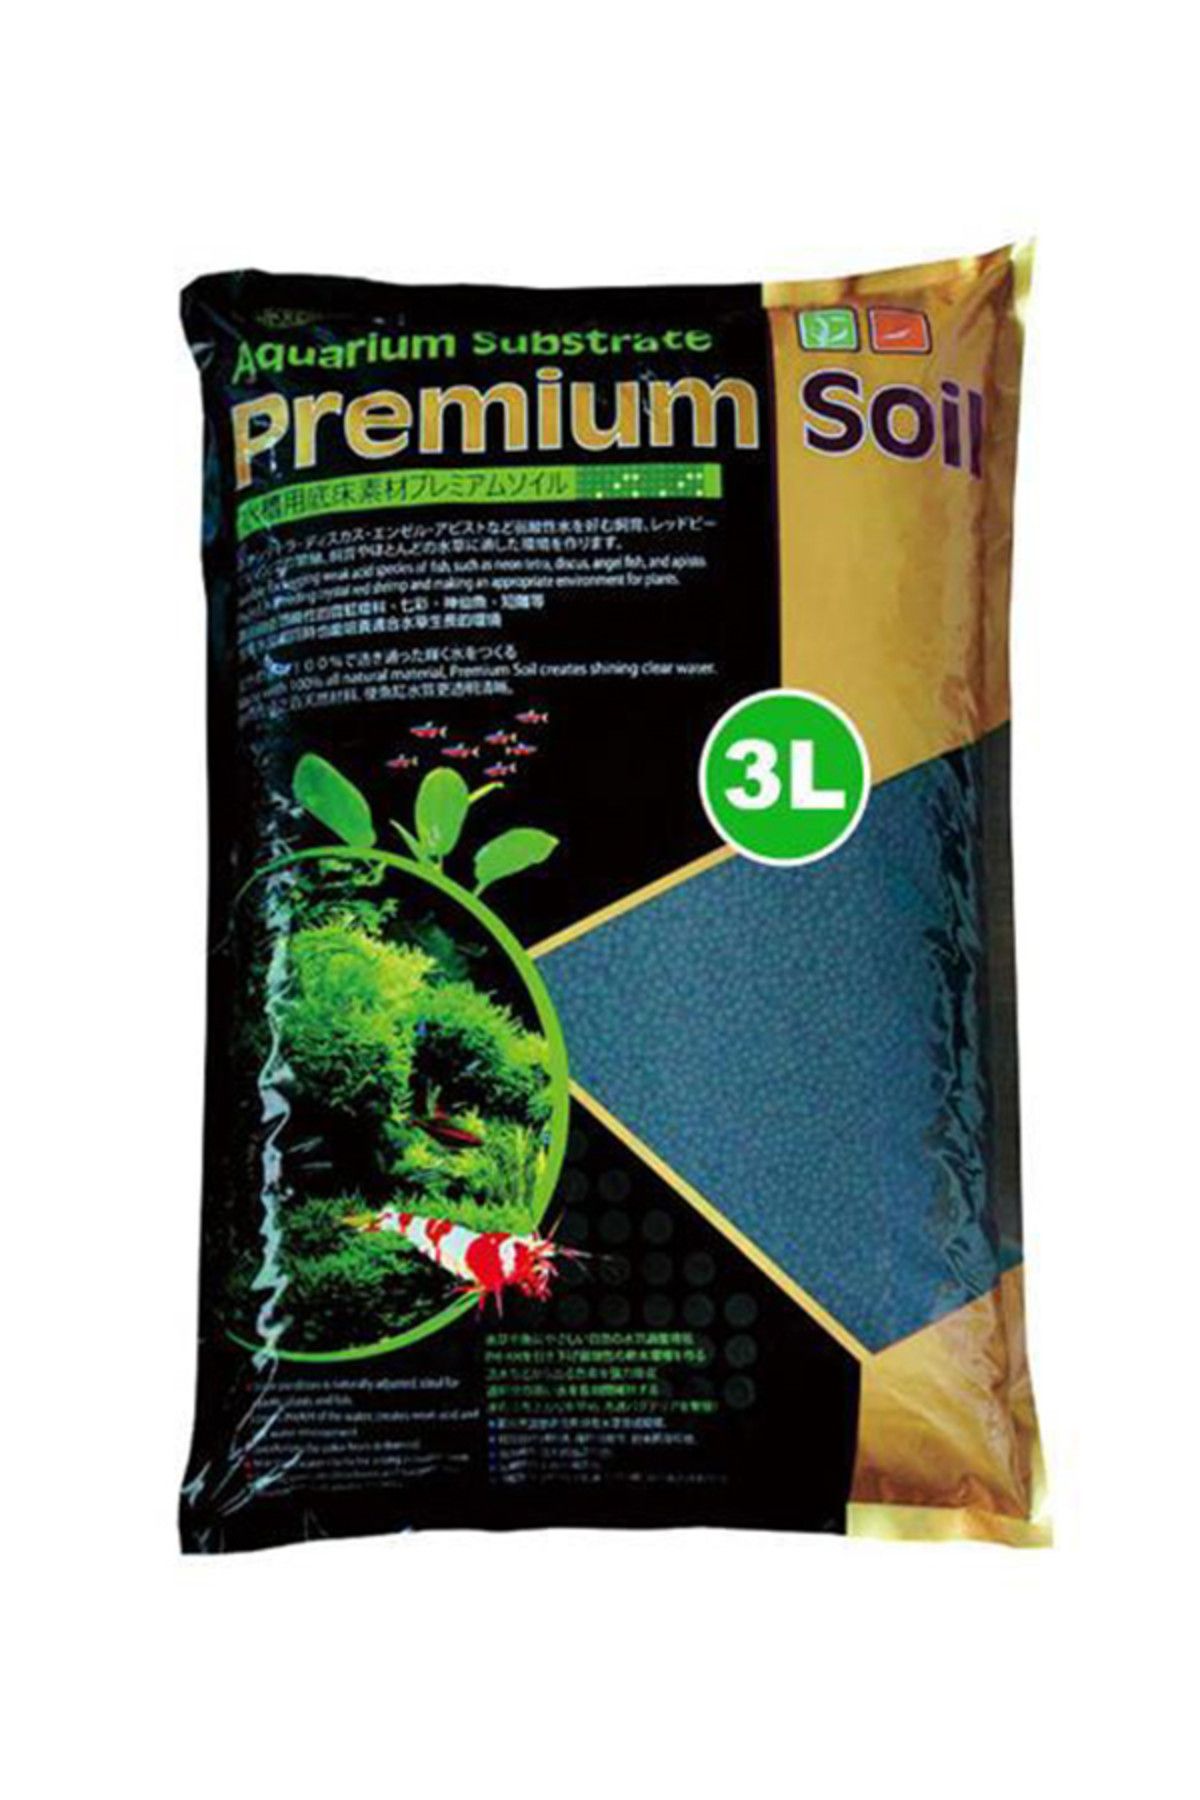 Ista Substrate Premium Soil 3 Lt Small i605